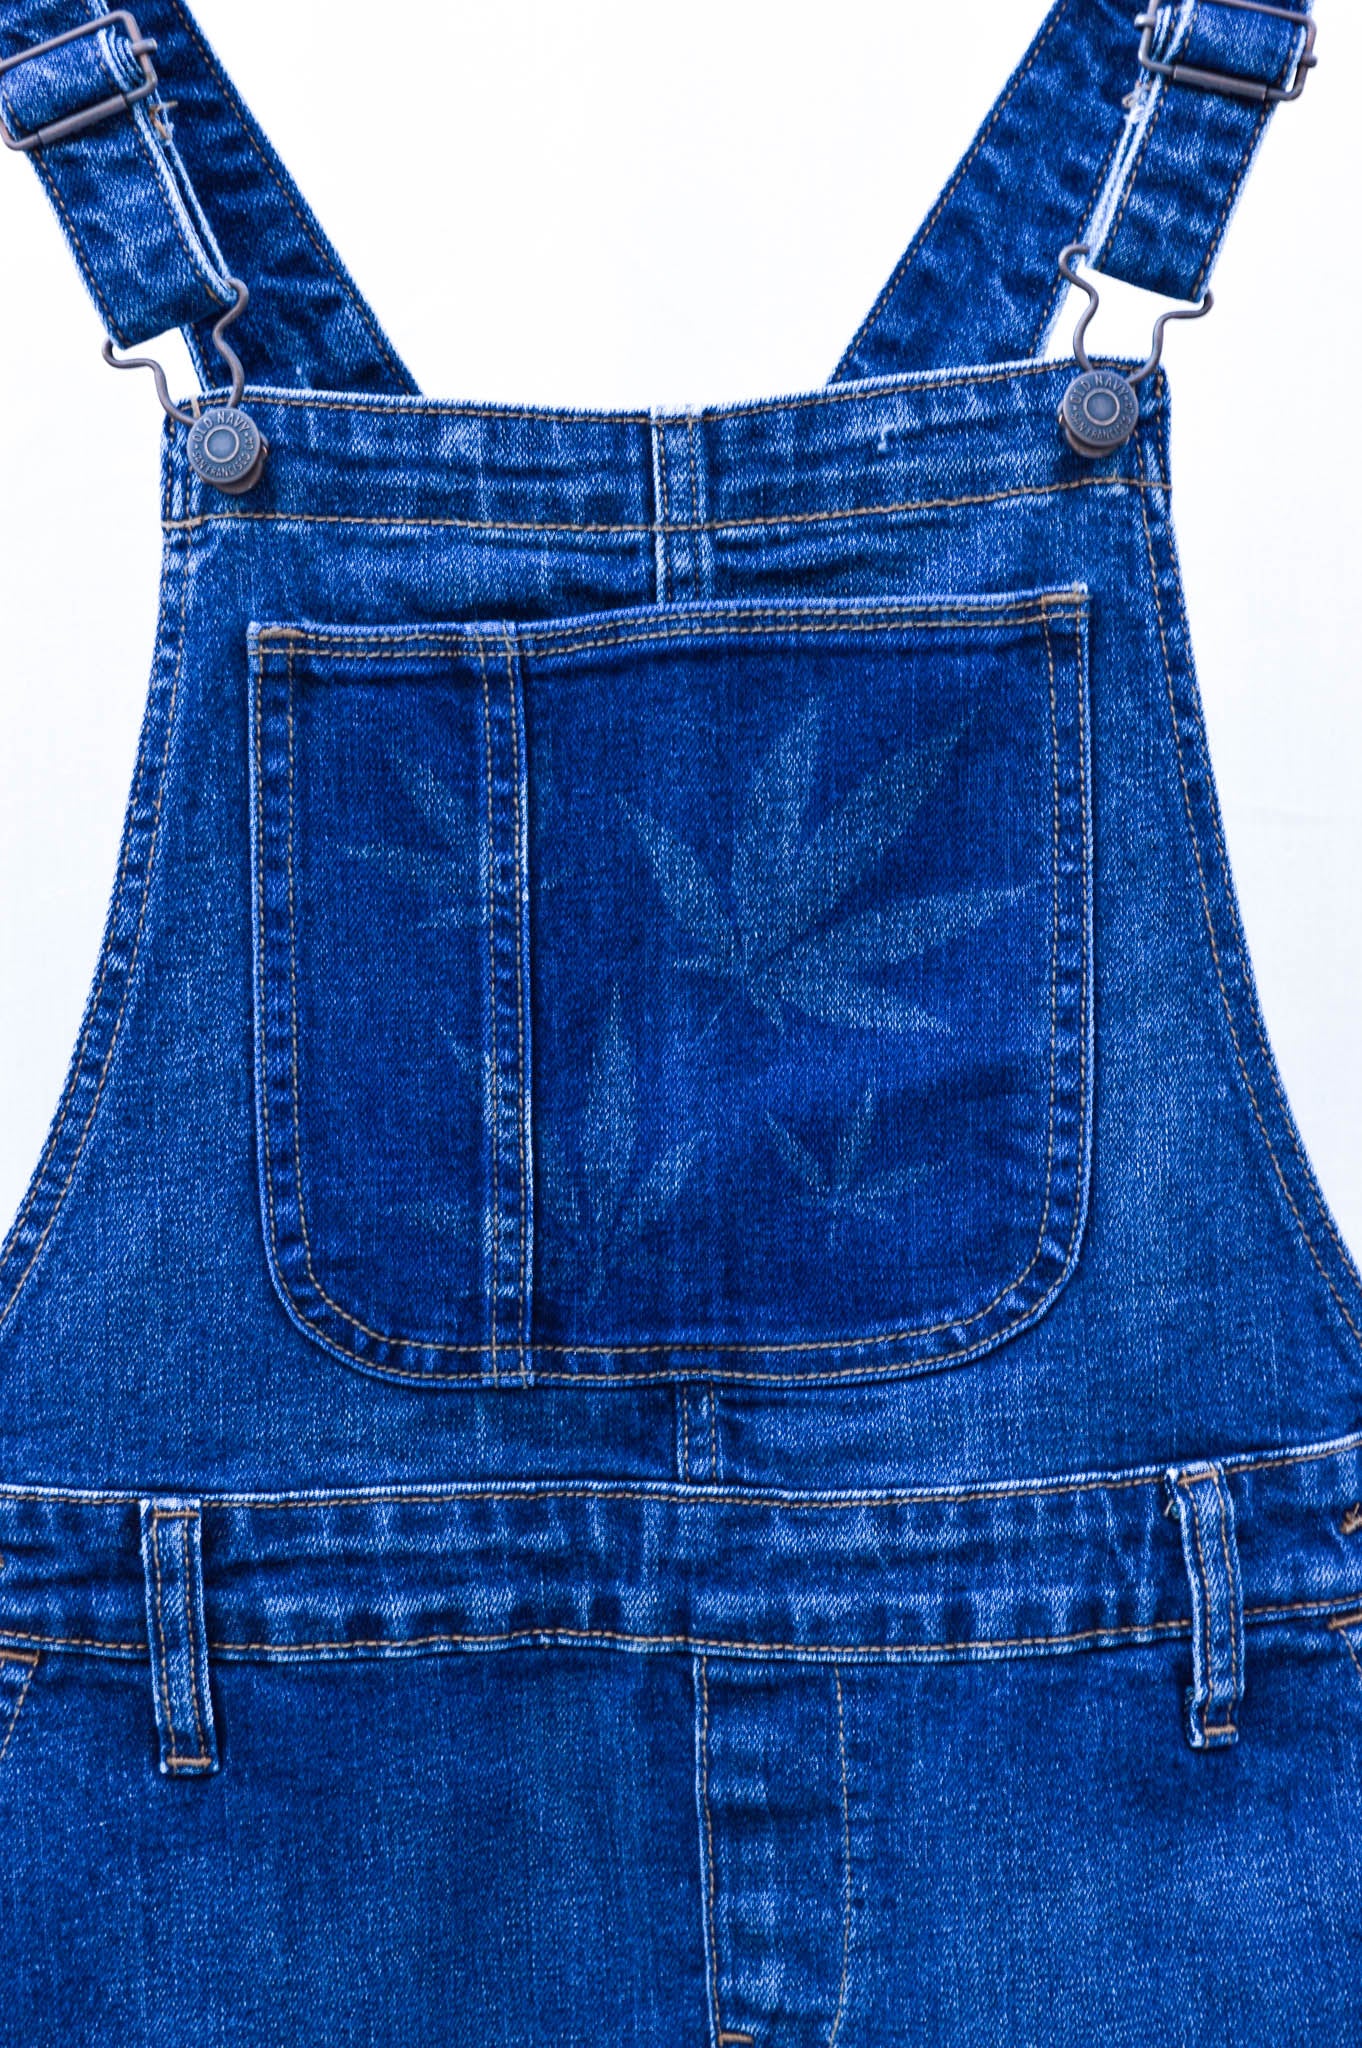 Women's Small Upcycled Denim Overalls